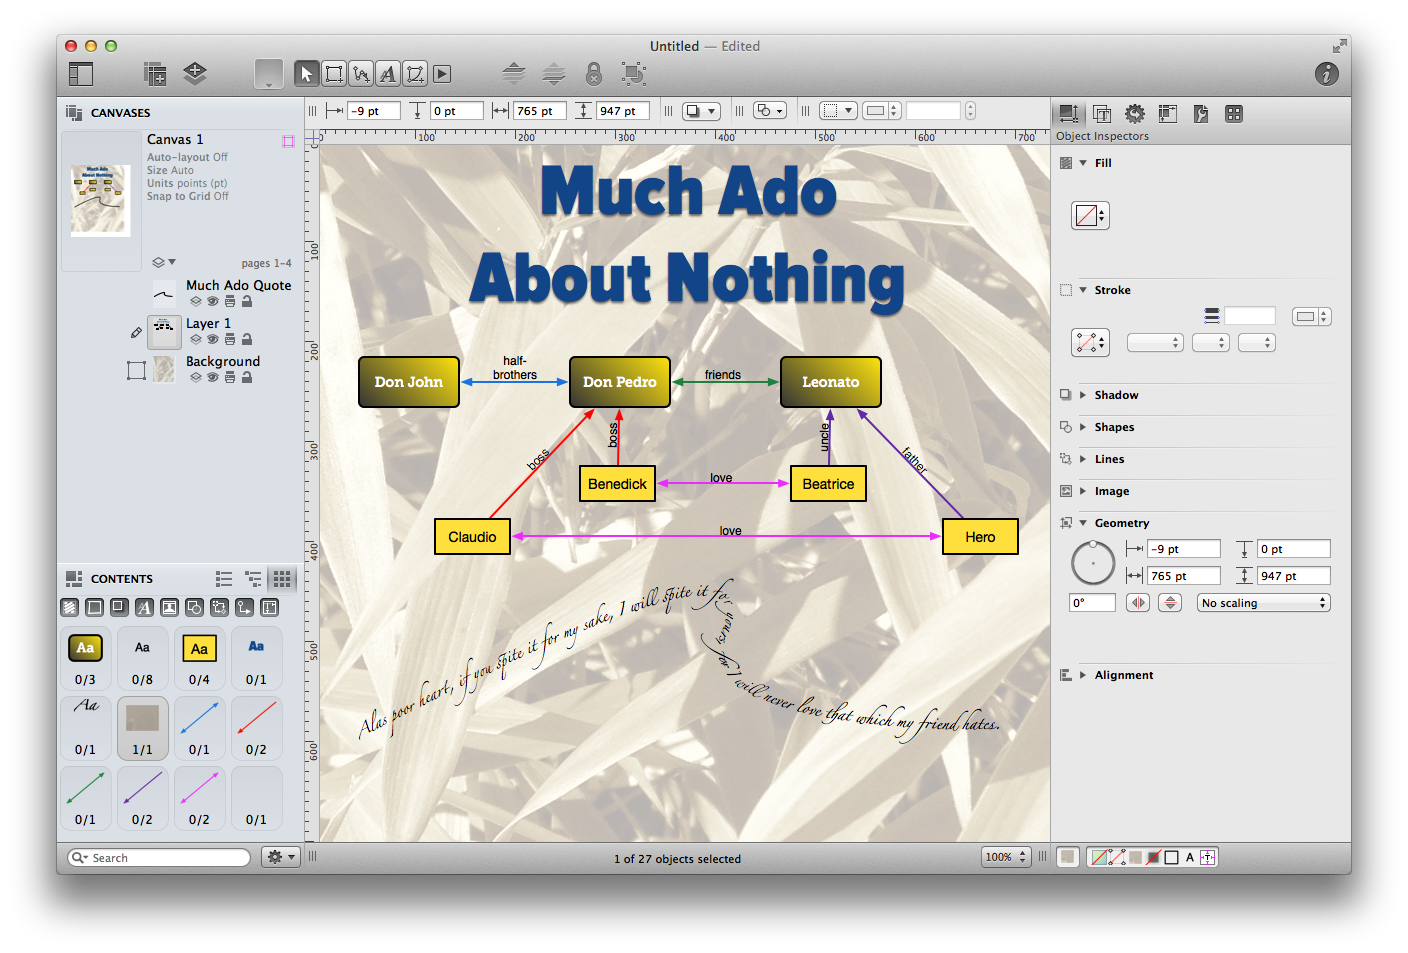 The final Much Ado About Nothing diagram